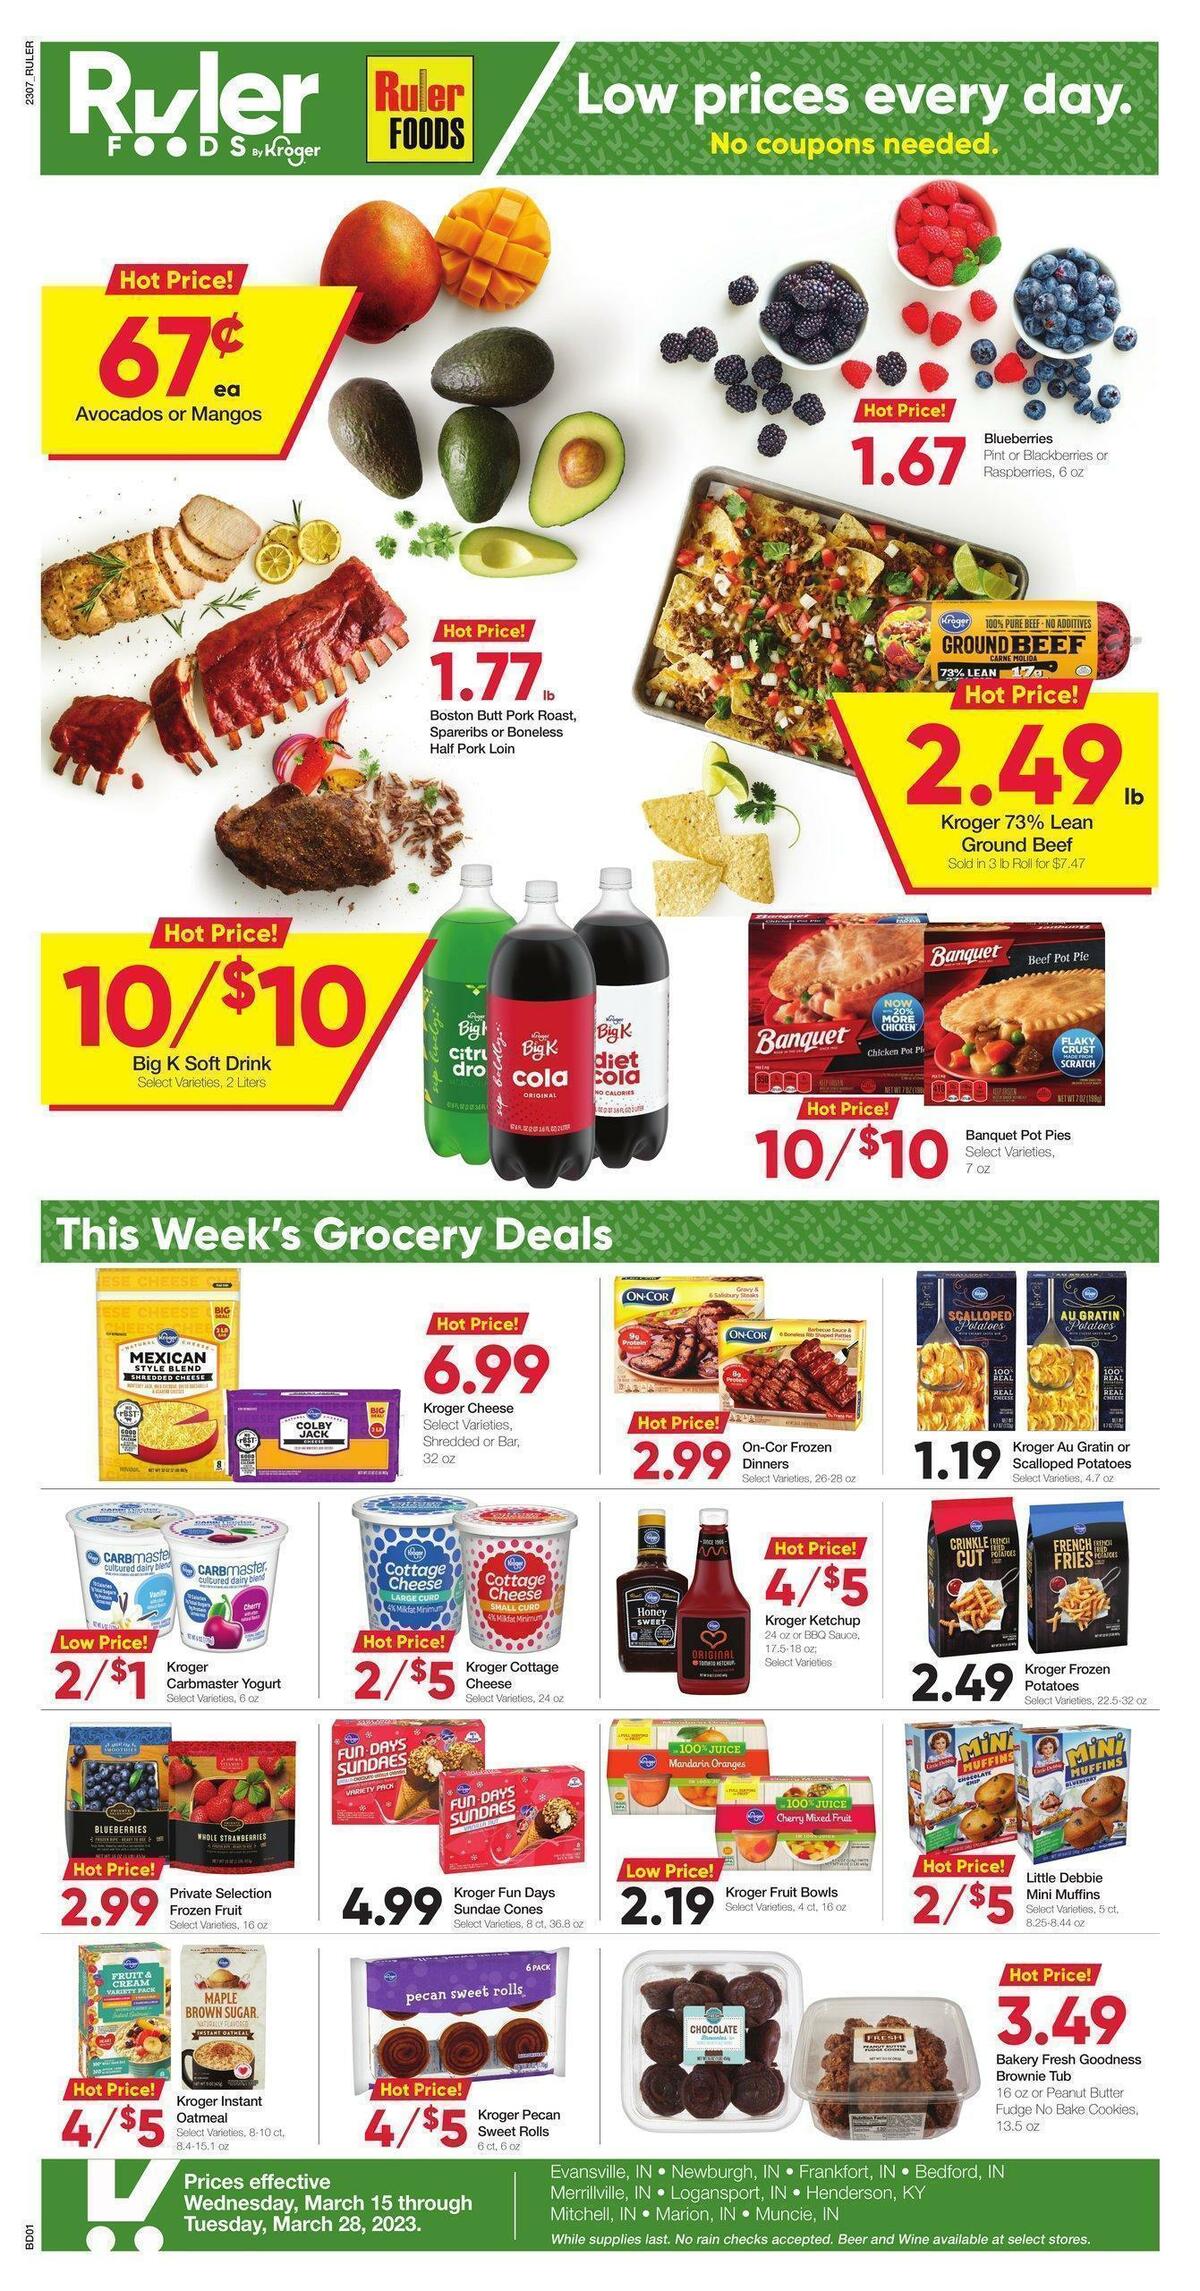 Ruler Foods Weekly Ad from March 15